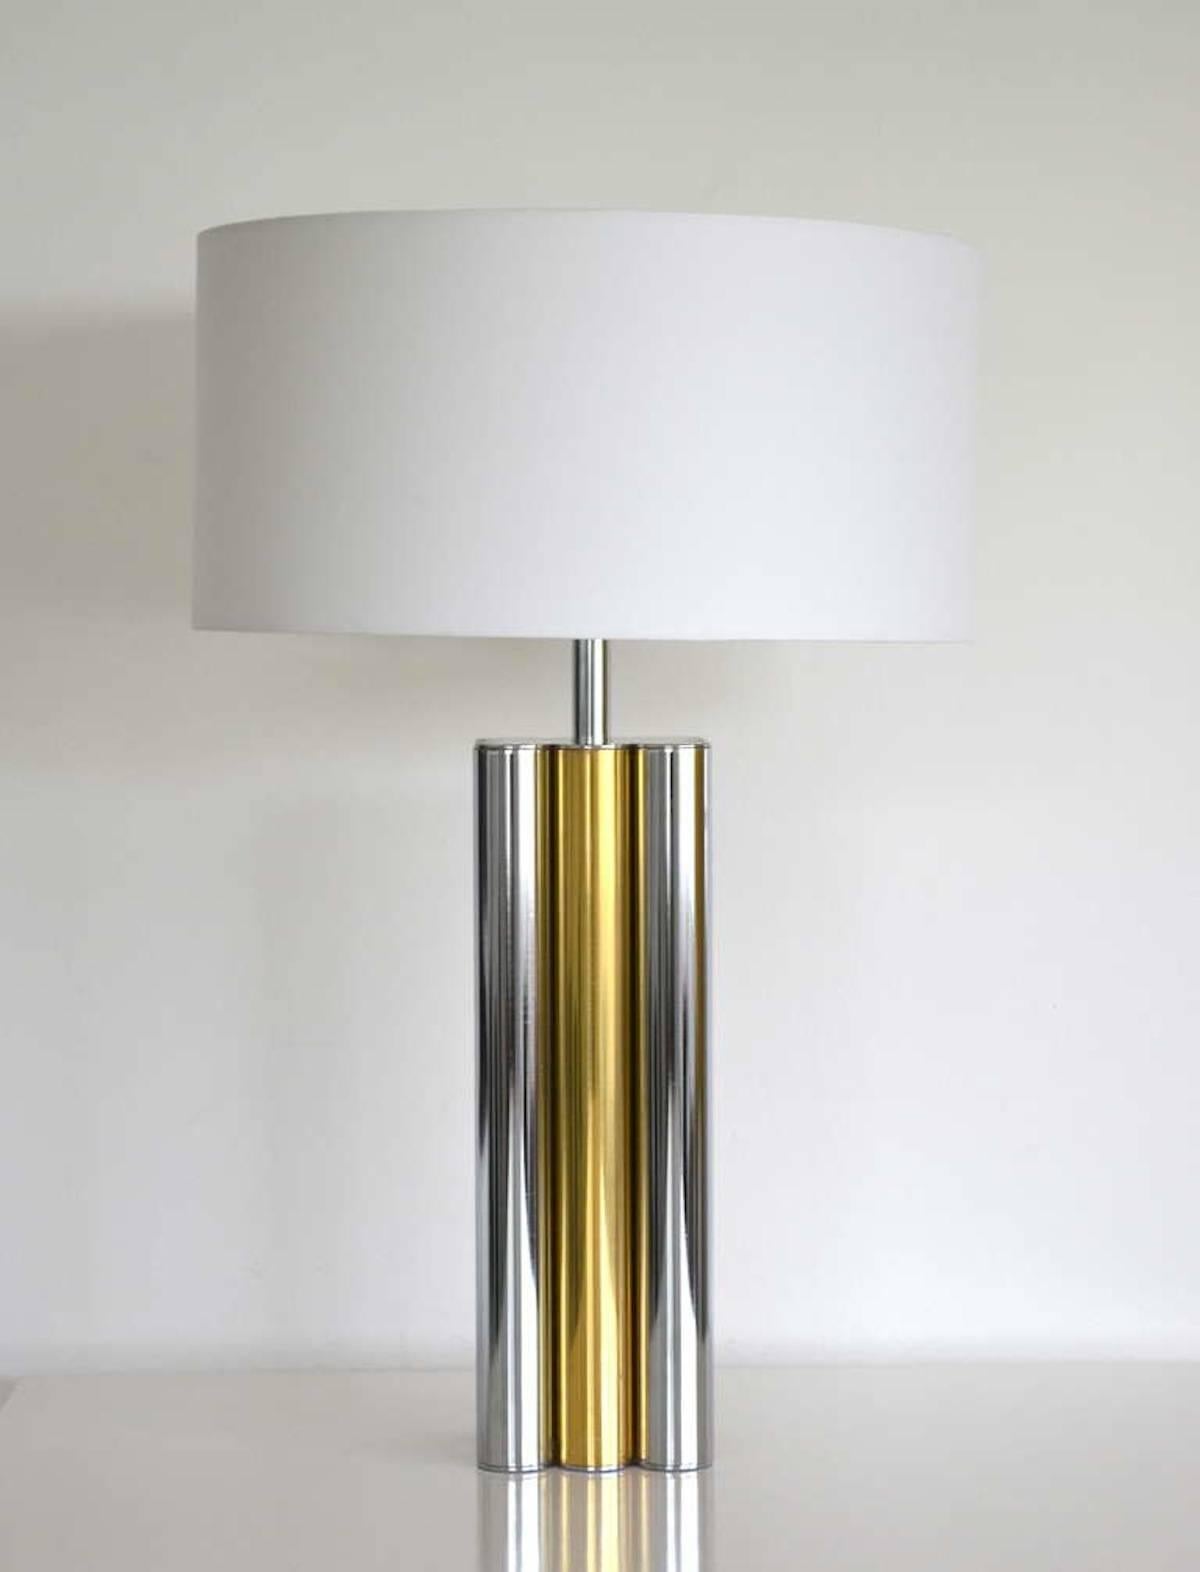 Mid-20th Century Midcentury Chrome and Brass Table Lamp For Sale